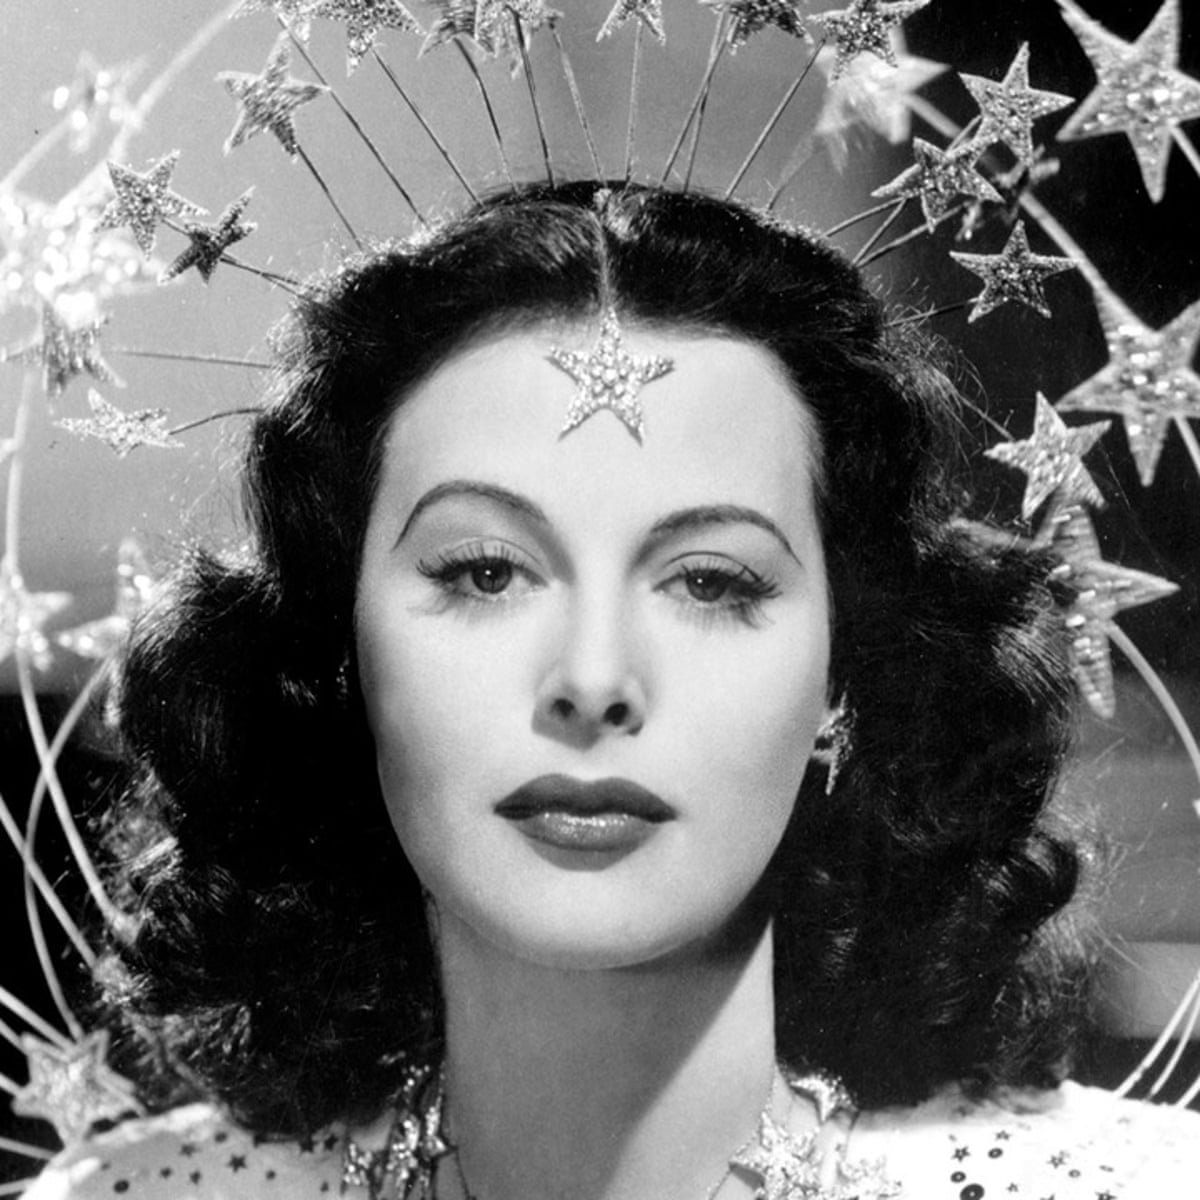 Hedy Lamarr – the 1940s 'bombshell' who helped invent wifi | Hedy Lamarr |  The Guardian